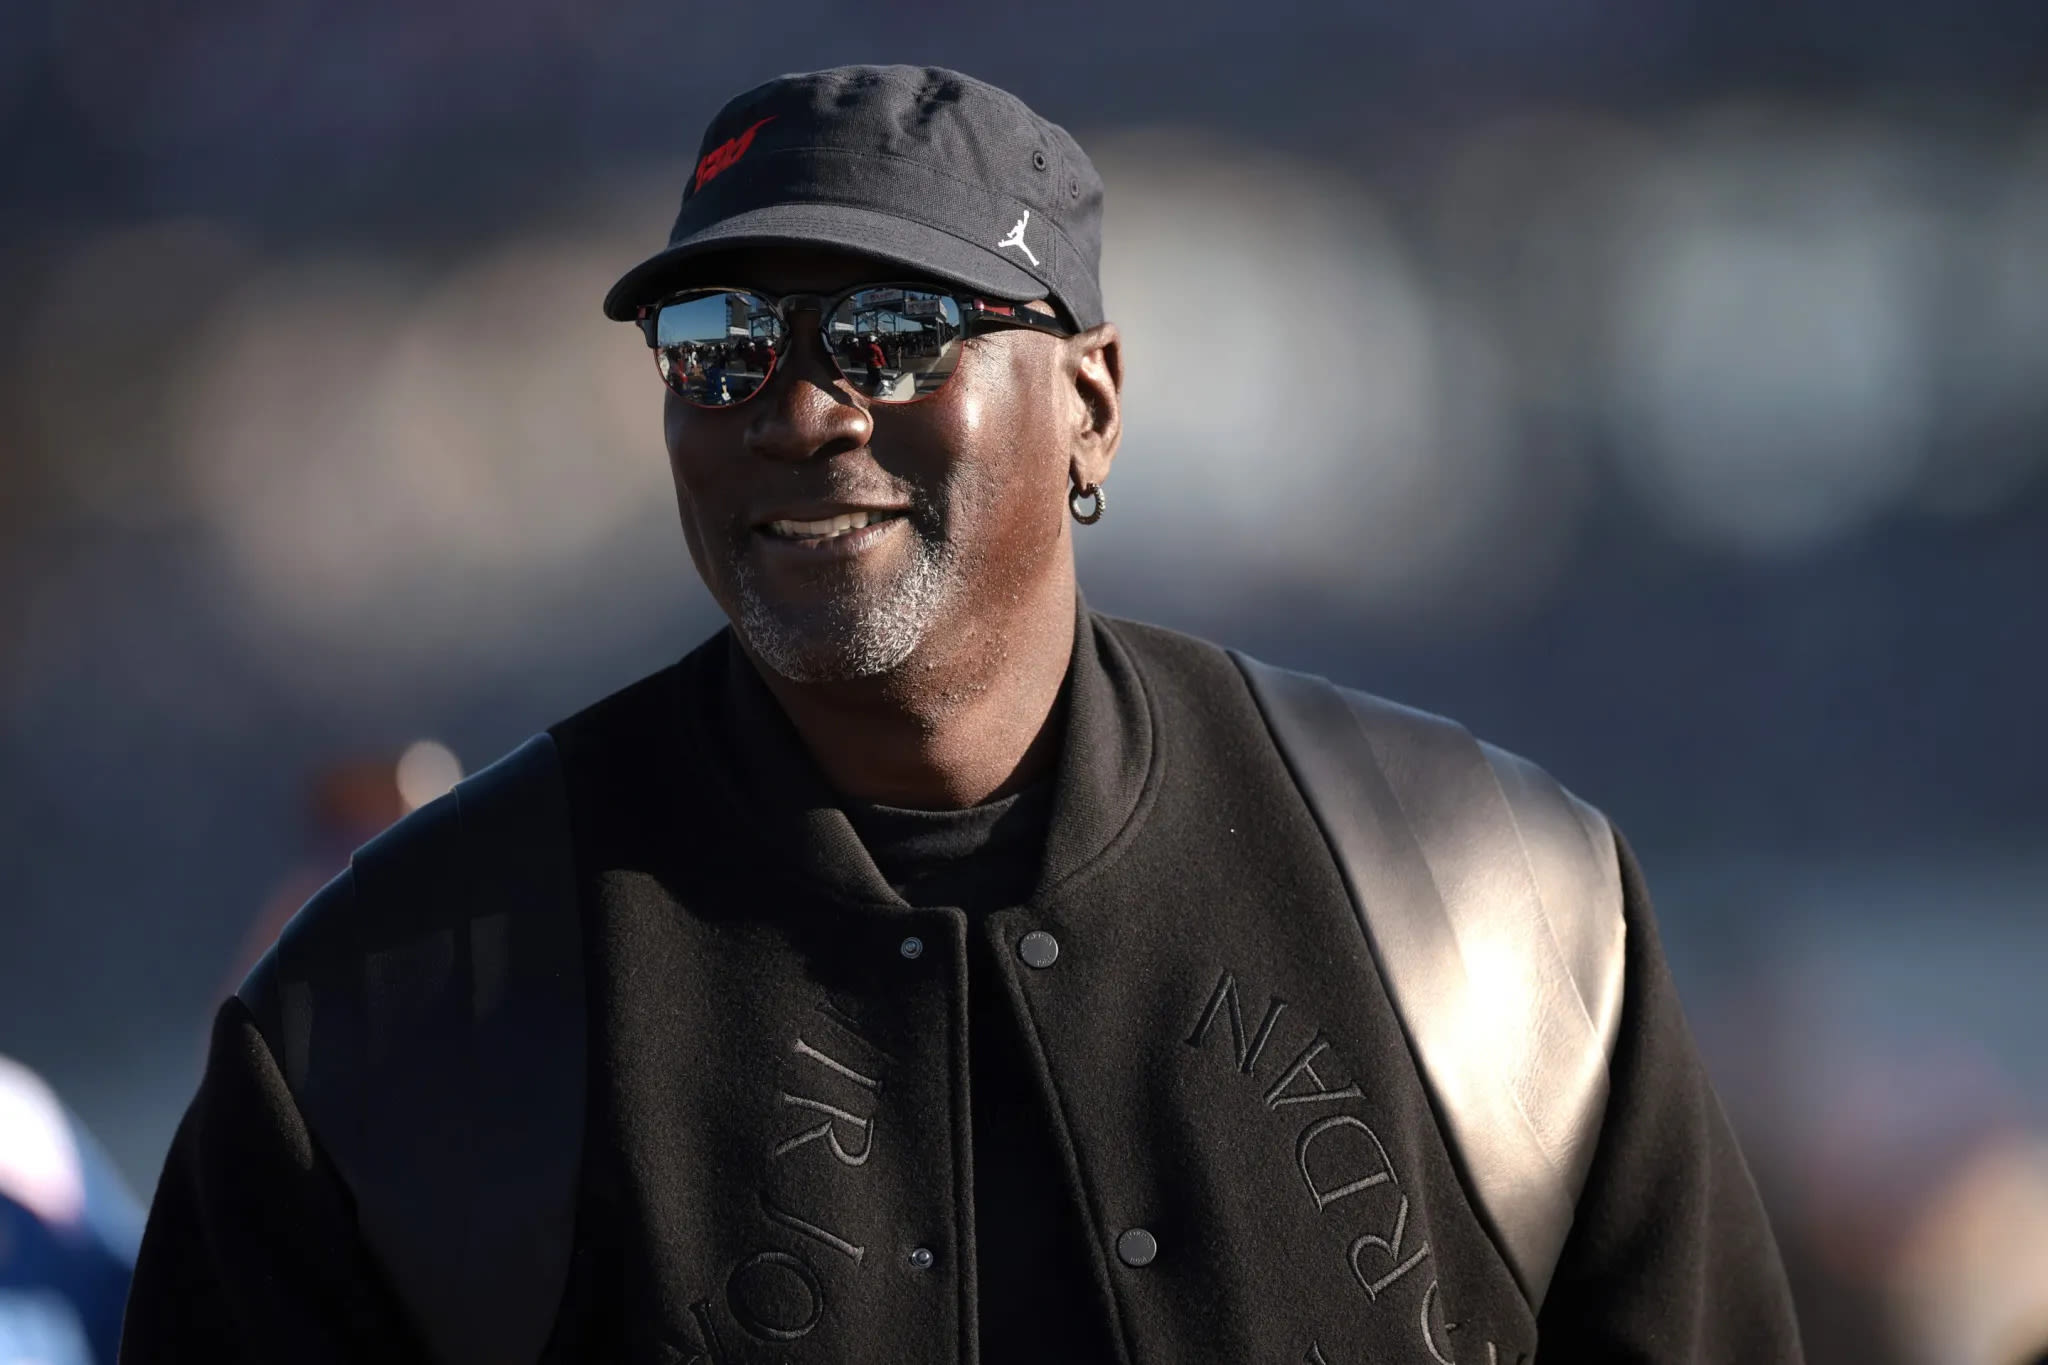 NBA legend Michael Jordan adds ‘his closest friends’ Derek Jeter and Serena Williams to tequila brand as it prepares global expansion